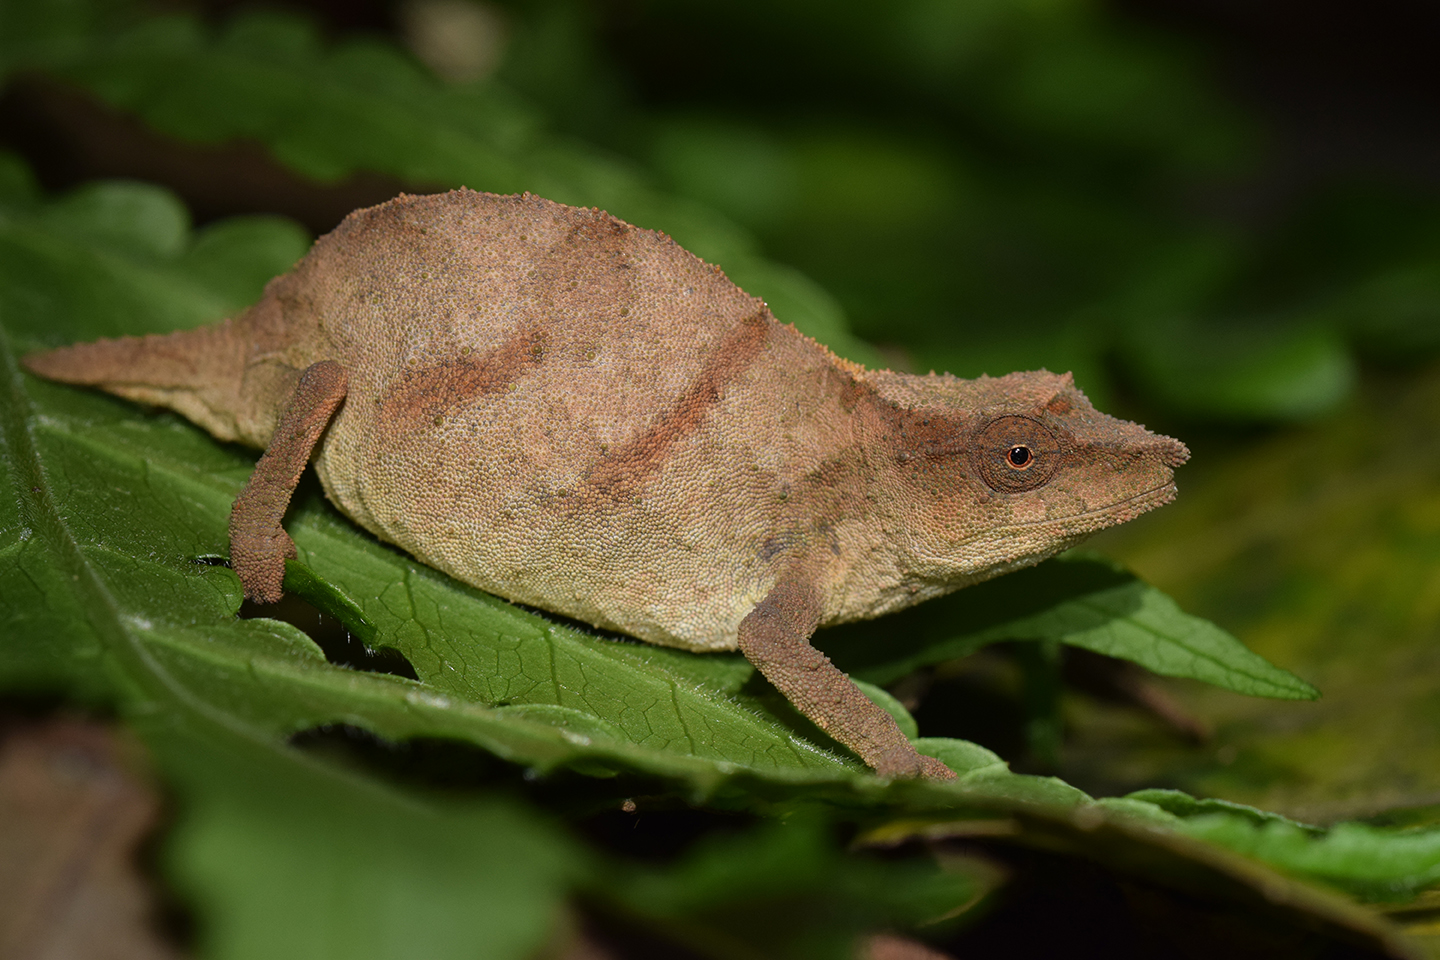 USD professor works to save chameleon species from extinction